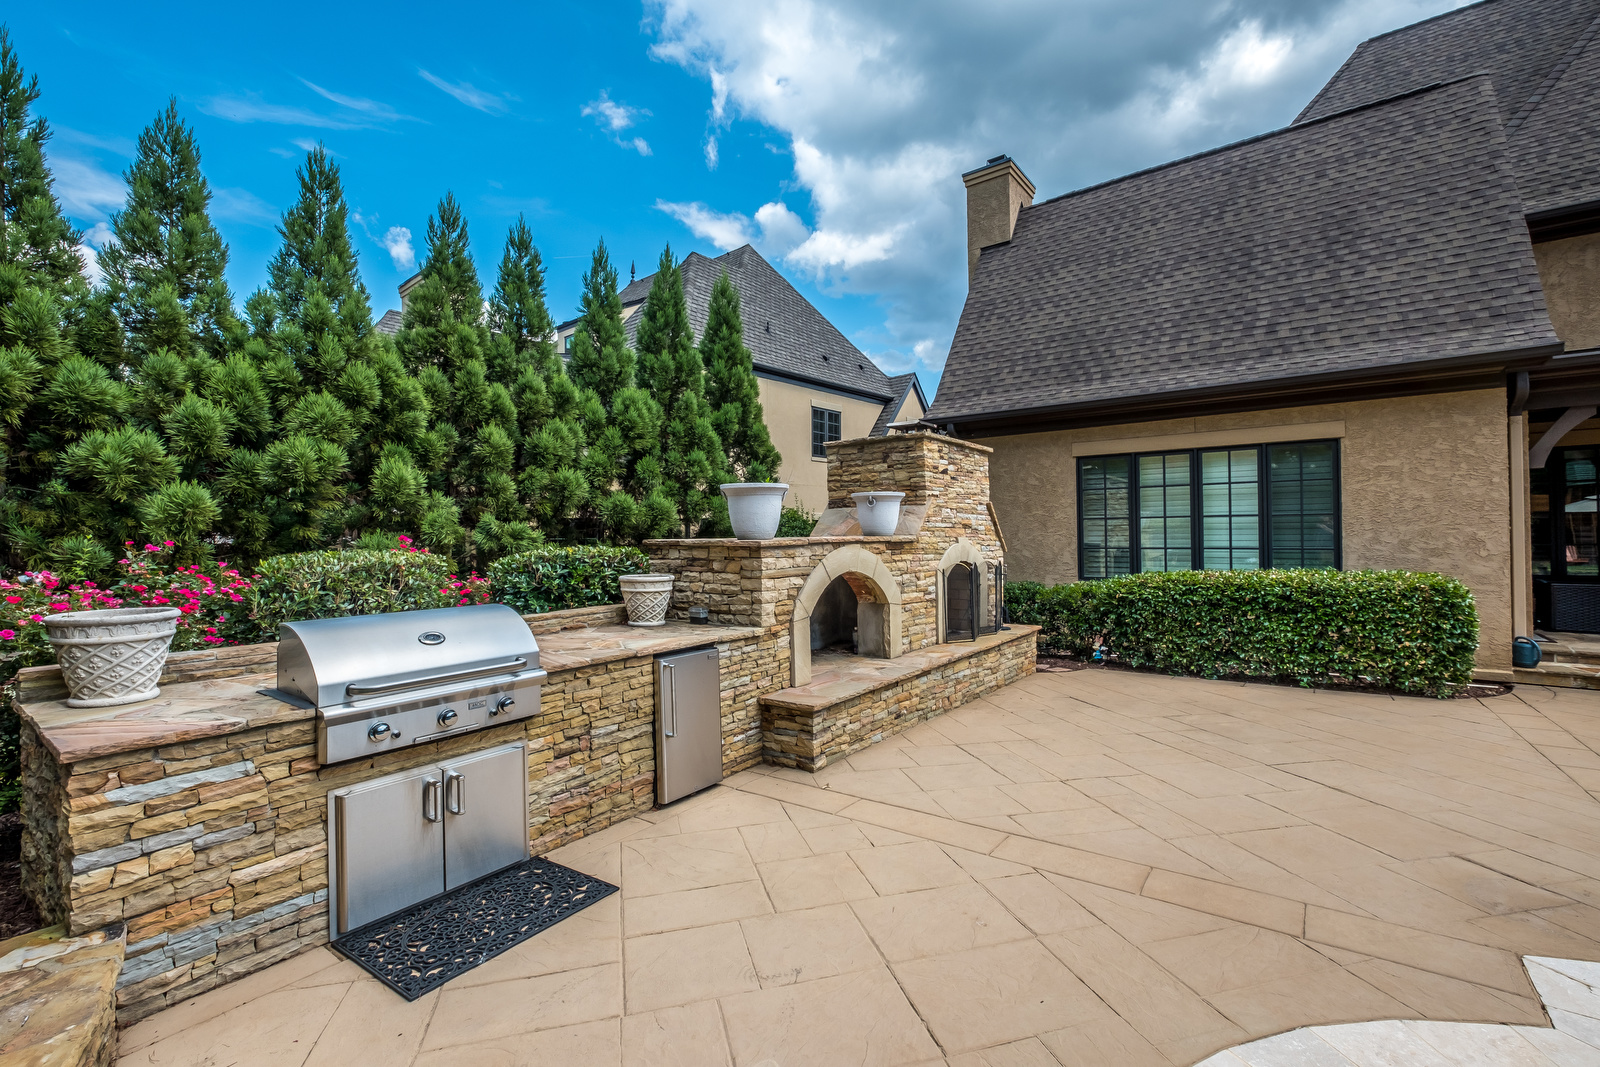 Backyard with built in grill area drink fridge pizza oven and fireplace stone details manicured trees in background